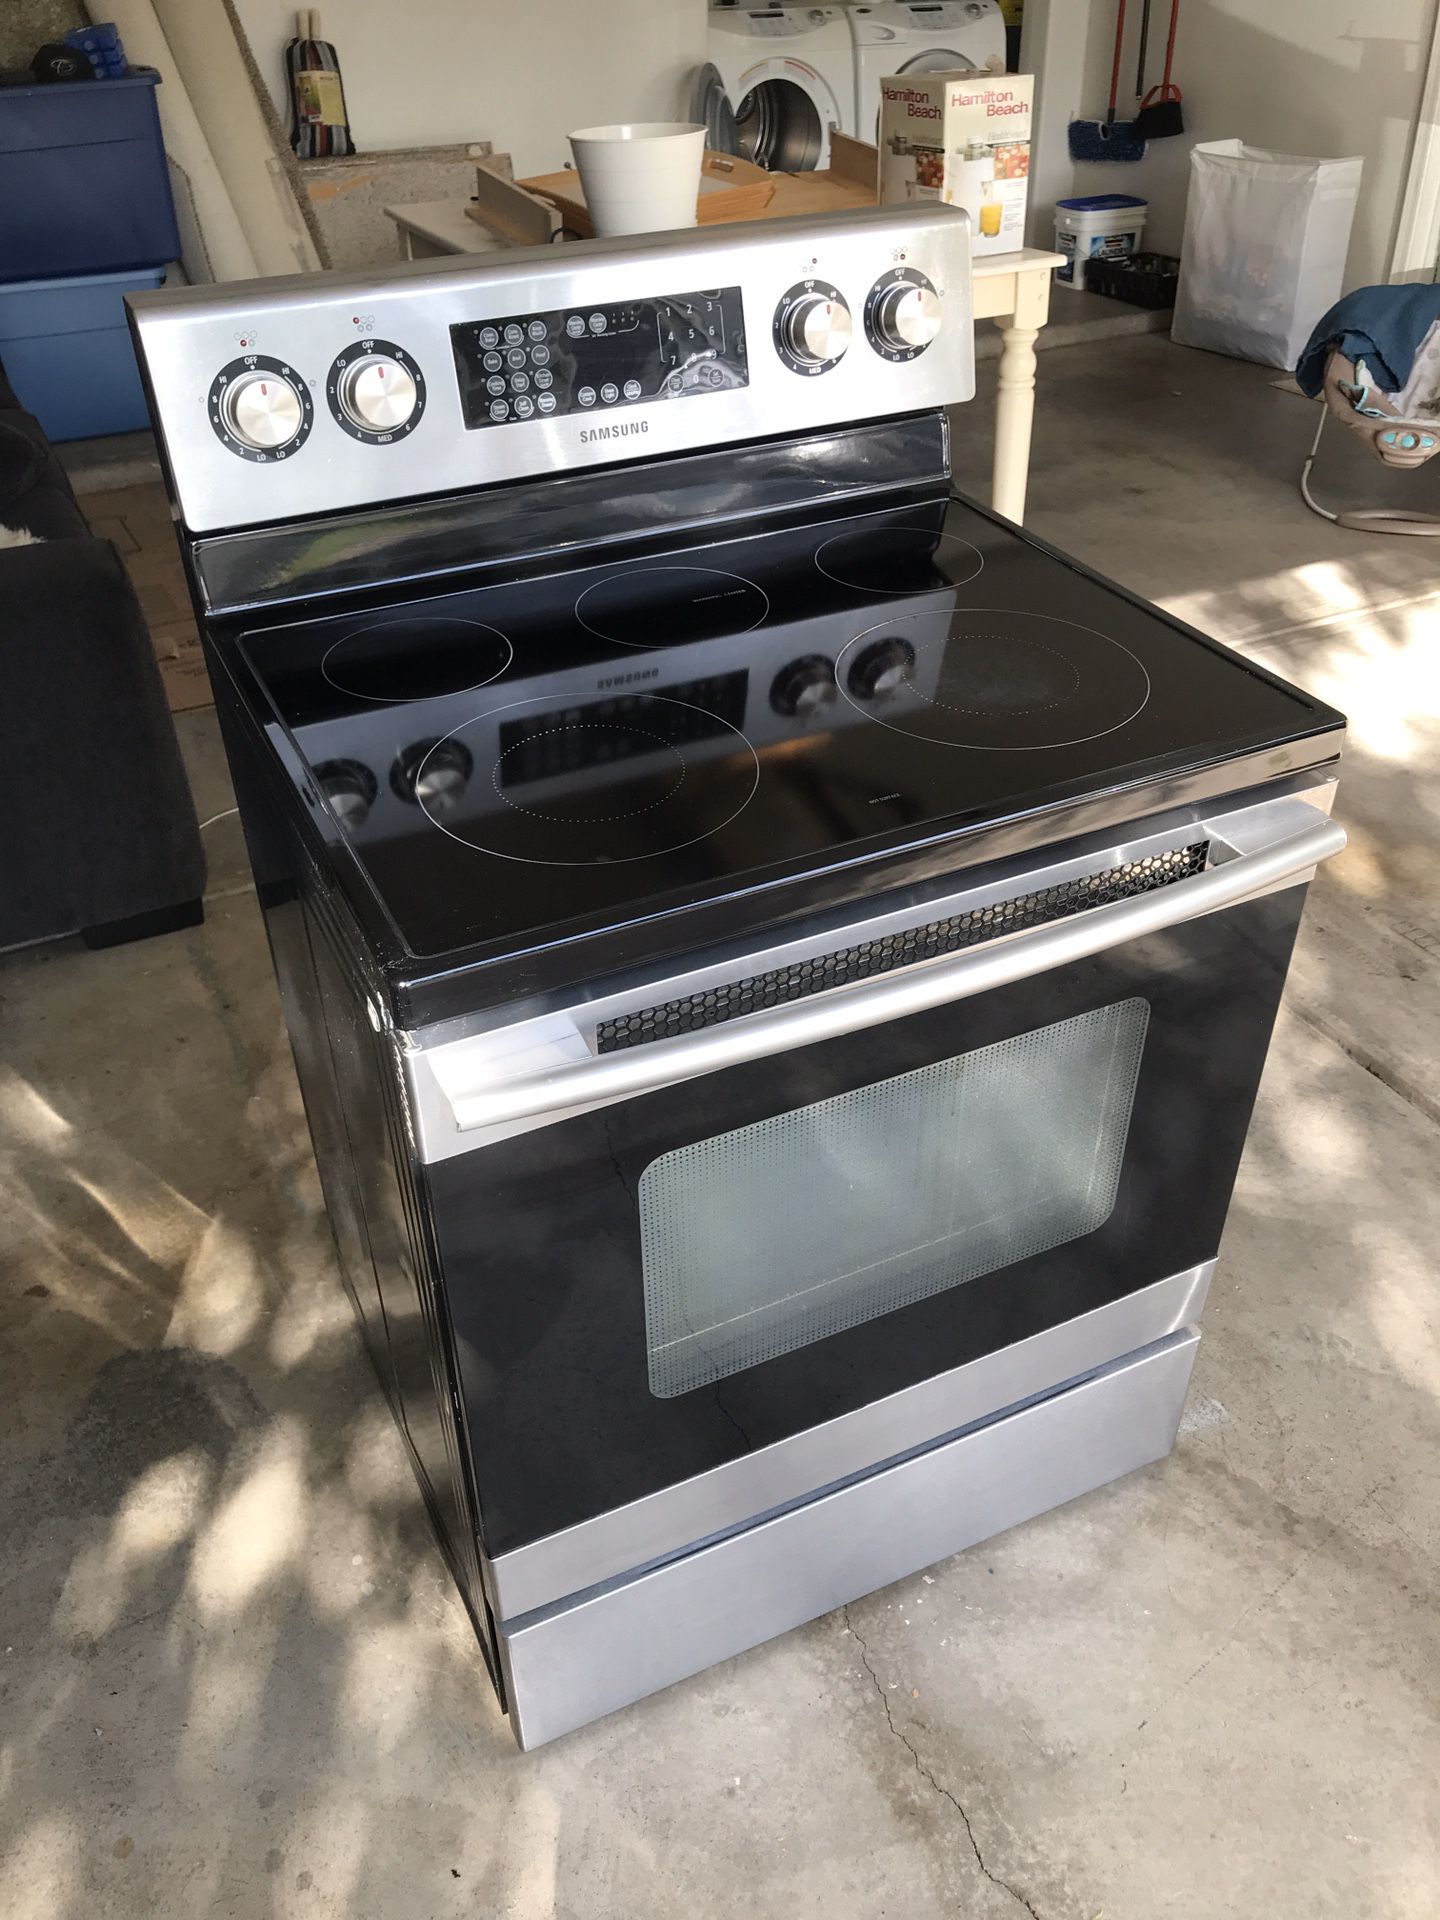 Samsung convection oven